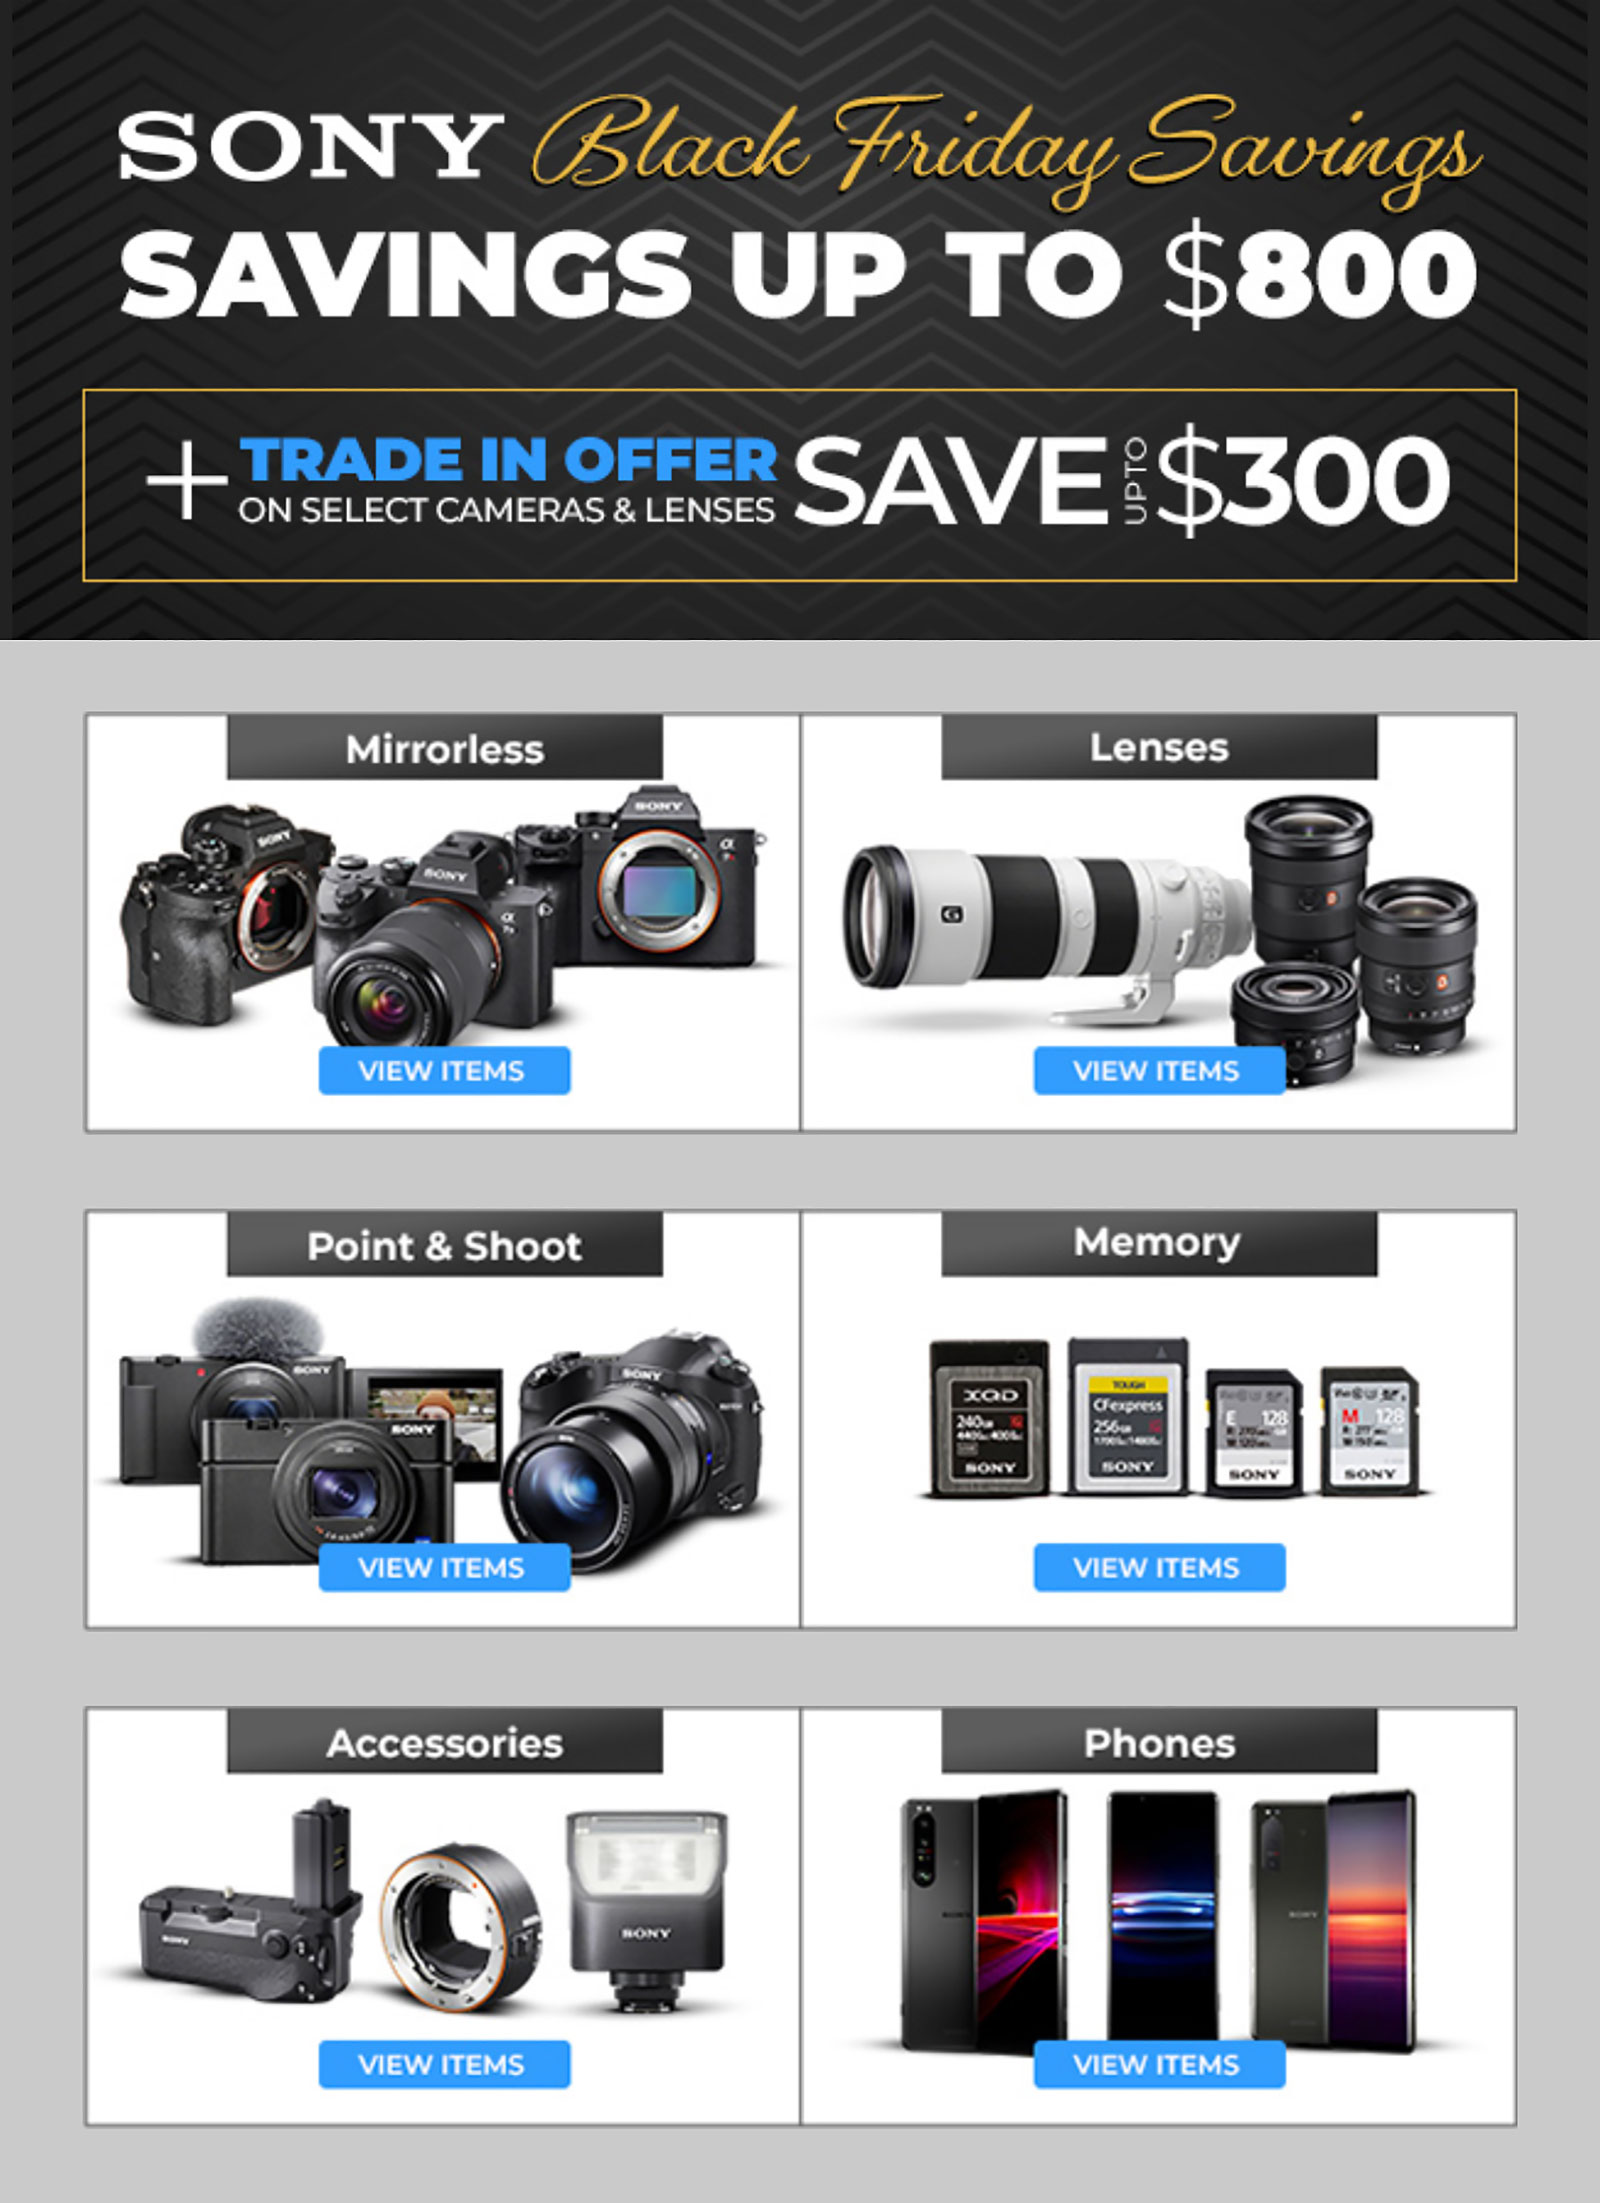 Sony Black Friday Savings on Cameras, Lenses & Accessories